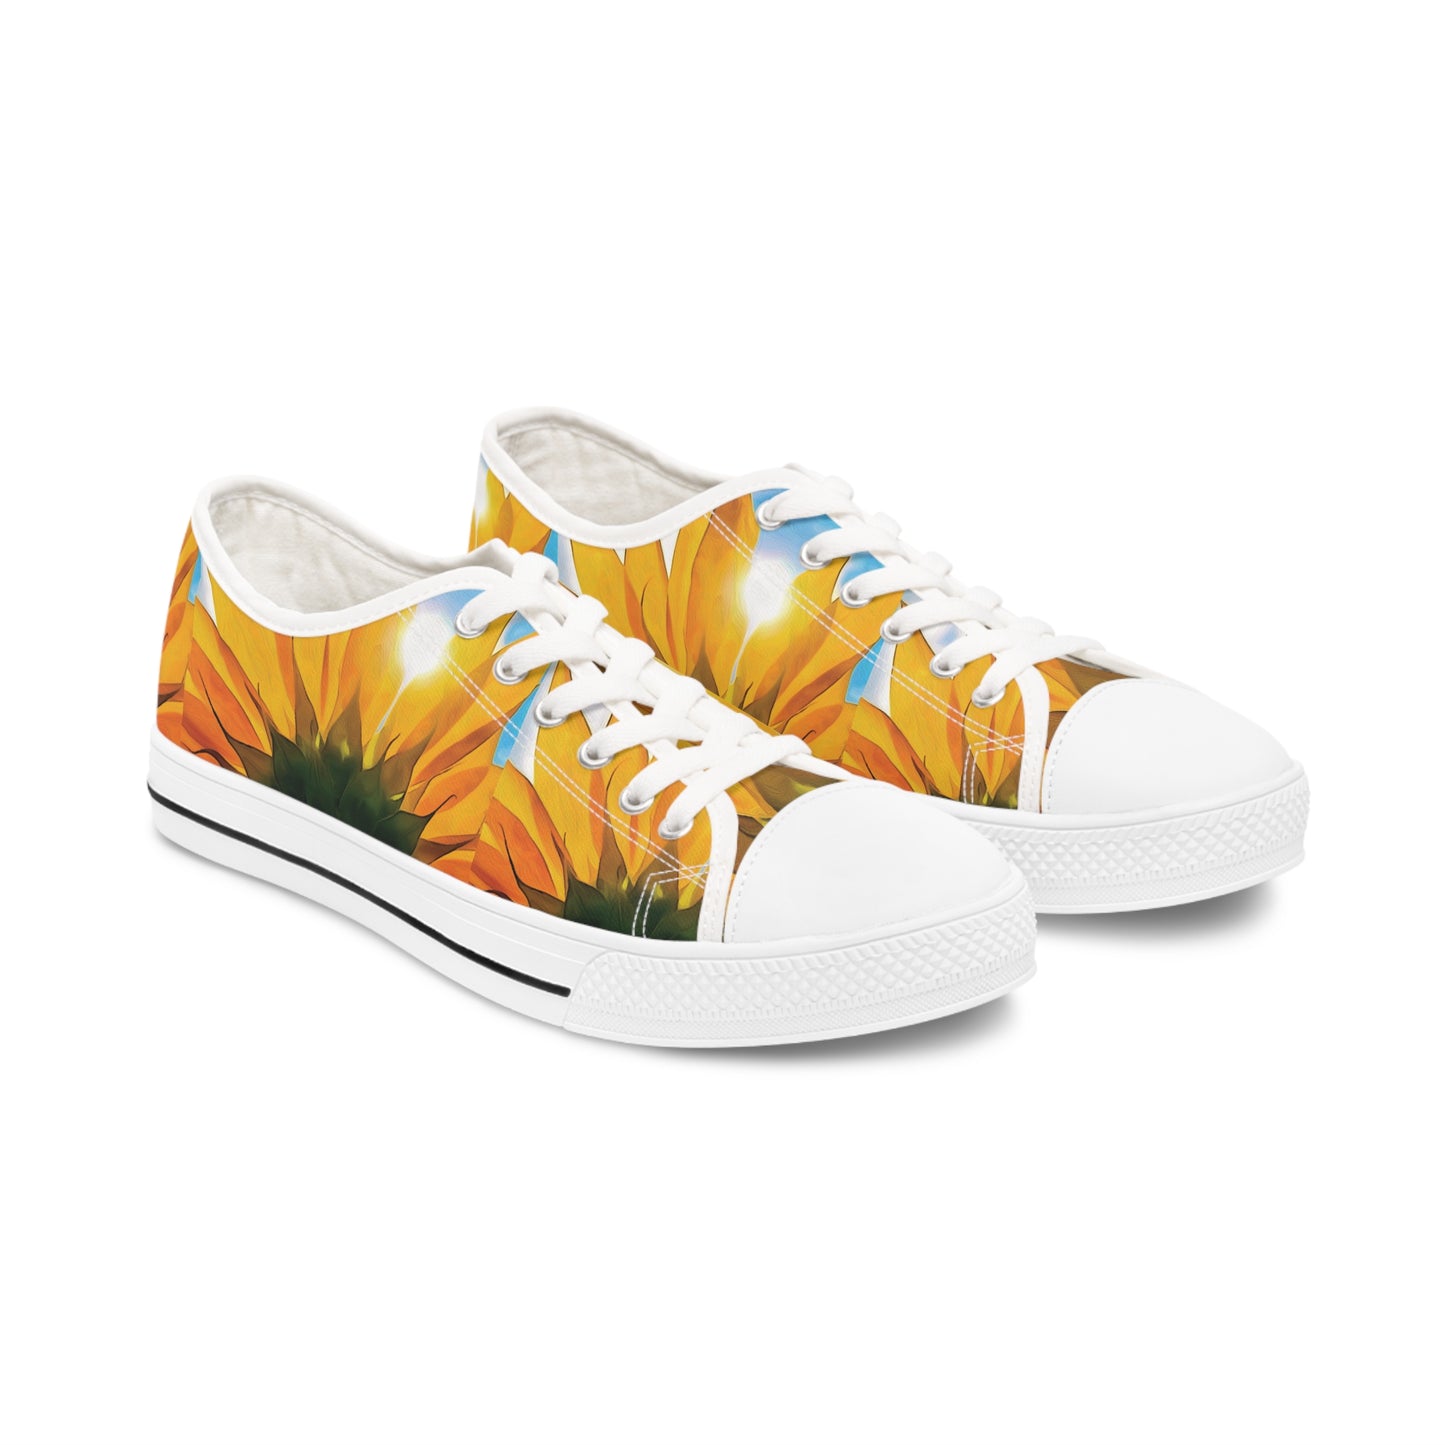 A Bright Sunflower Day Women's Low Top Sneakers